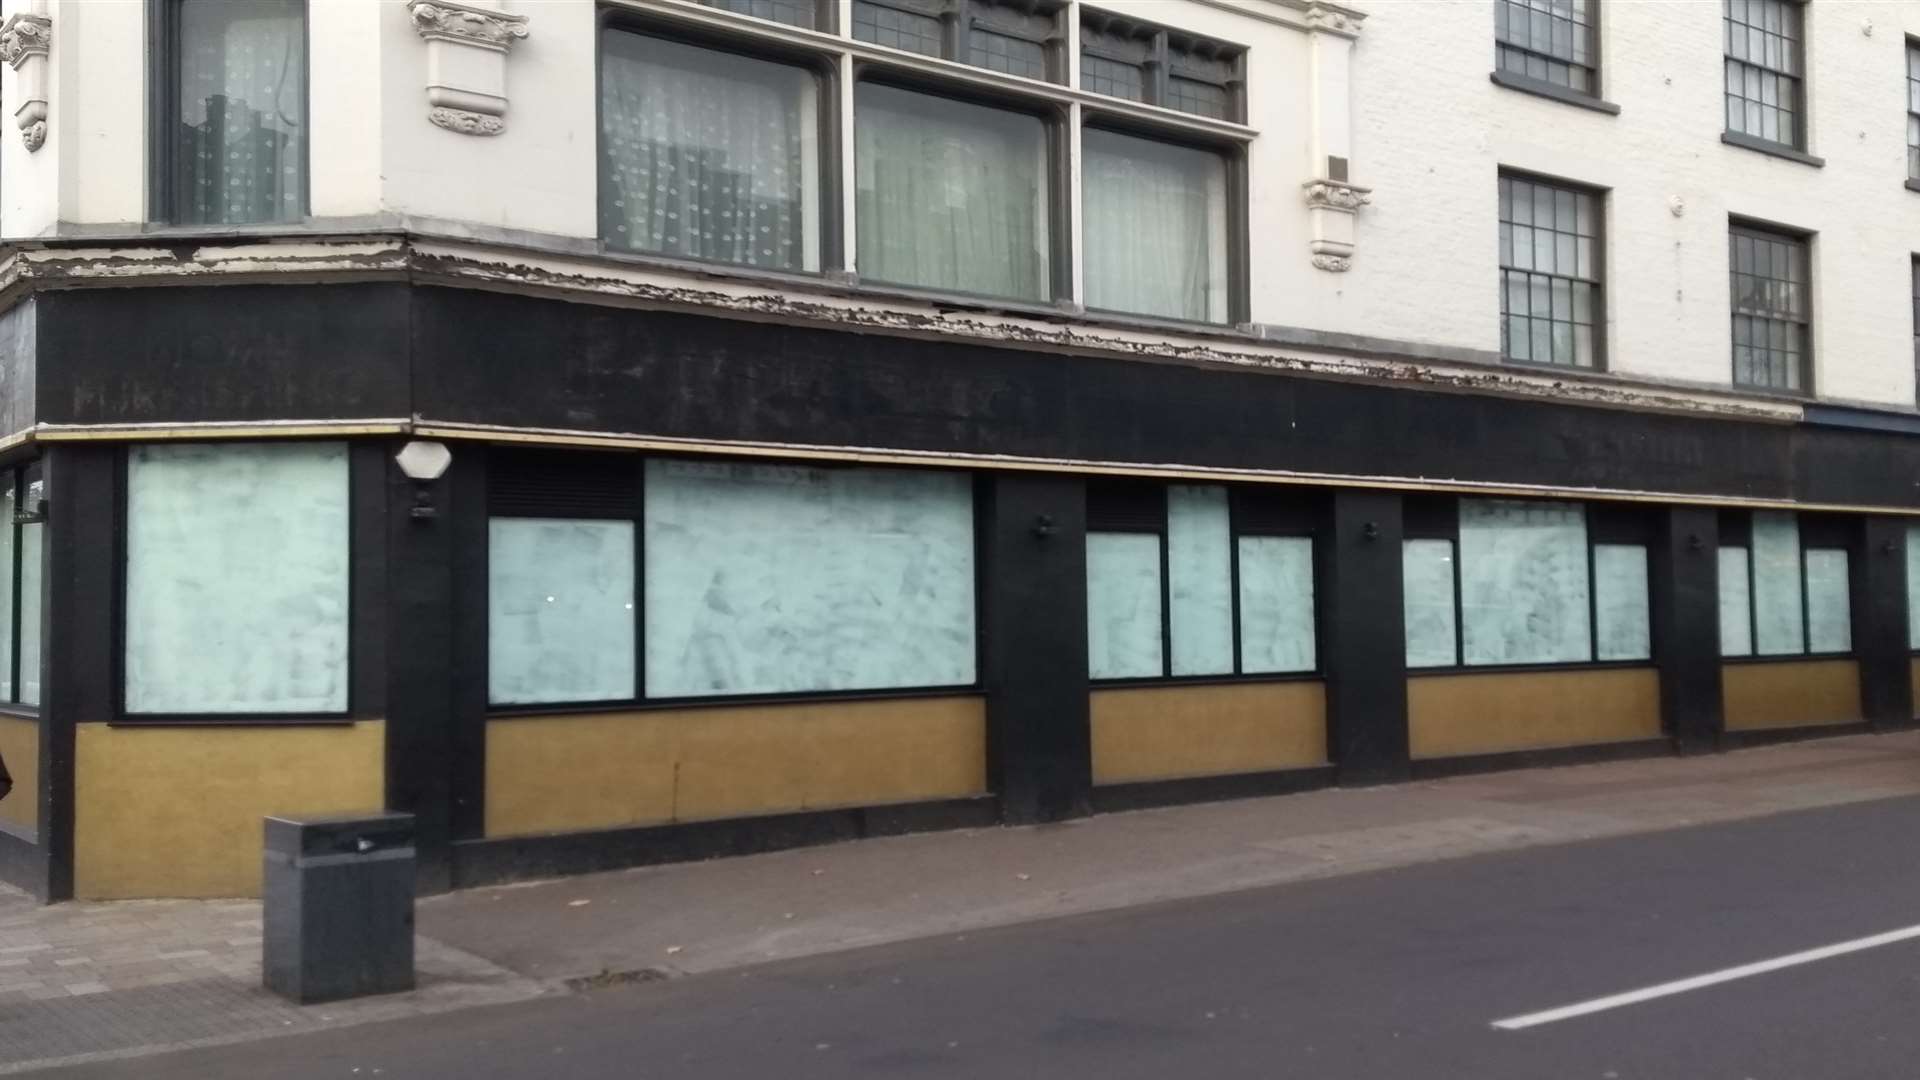 Work is underway behind the whitewashed windows of the closed Buddha Belly restaurant